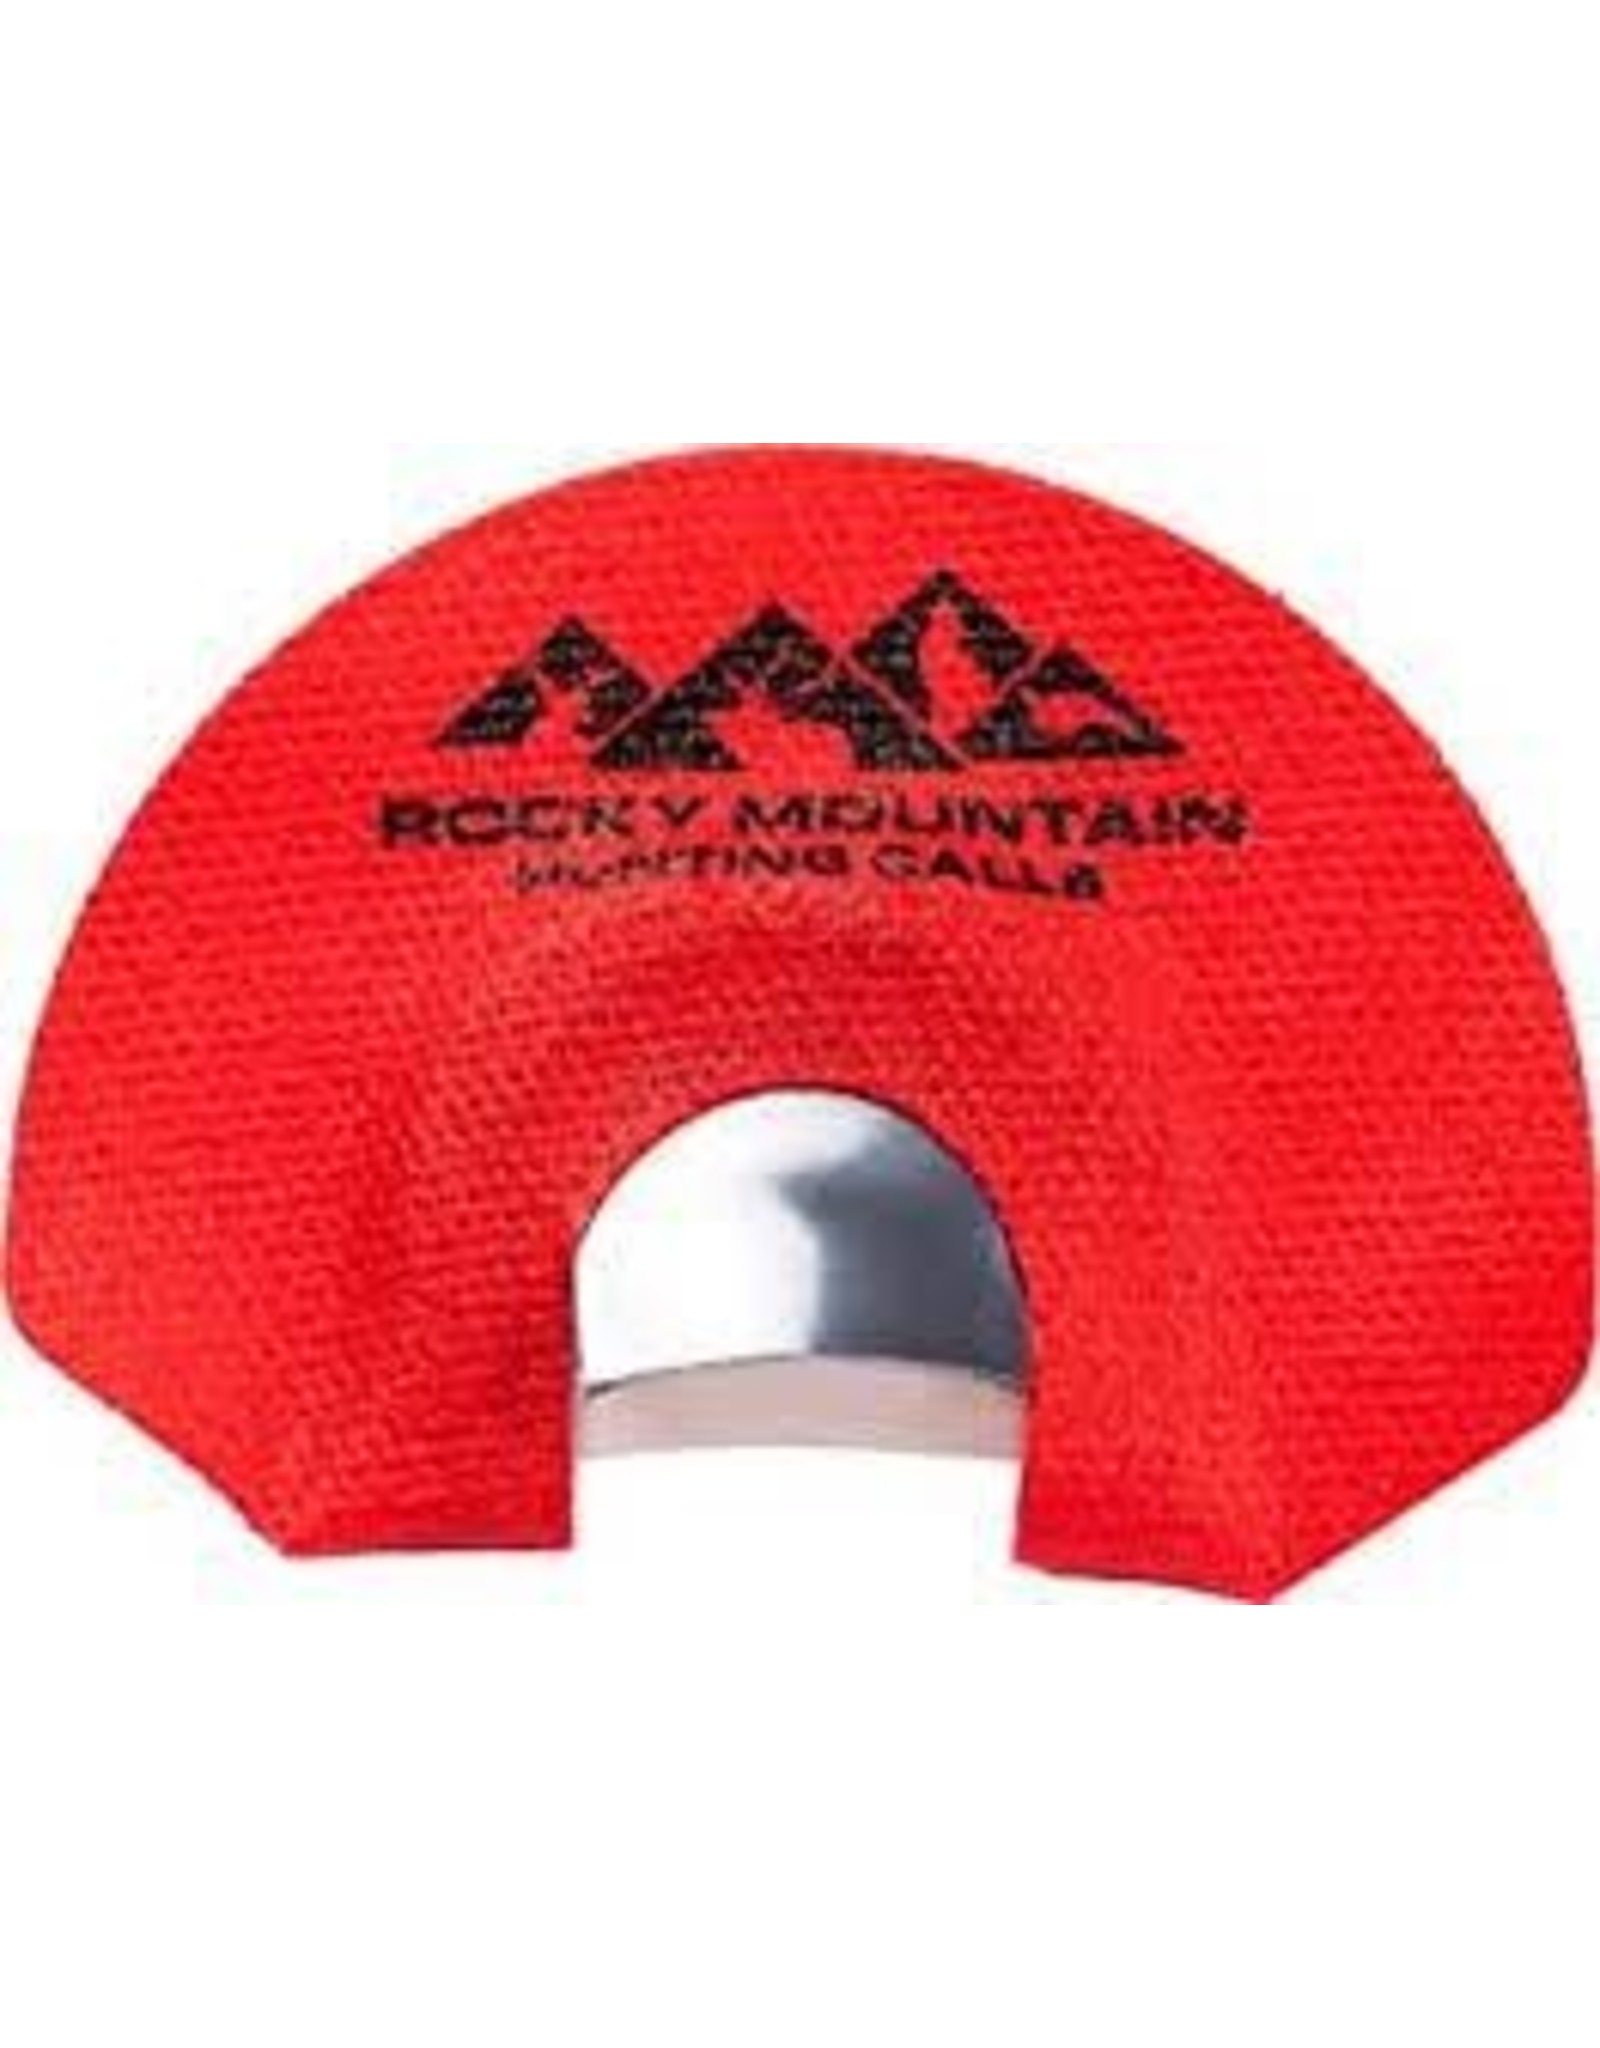 ROCKY MOUNTAIN HUNTING CALLS RMHC "PP" DIAPHRAGM MOUTH REED